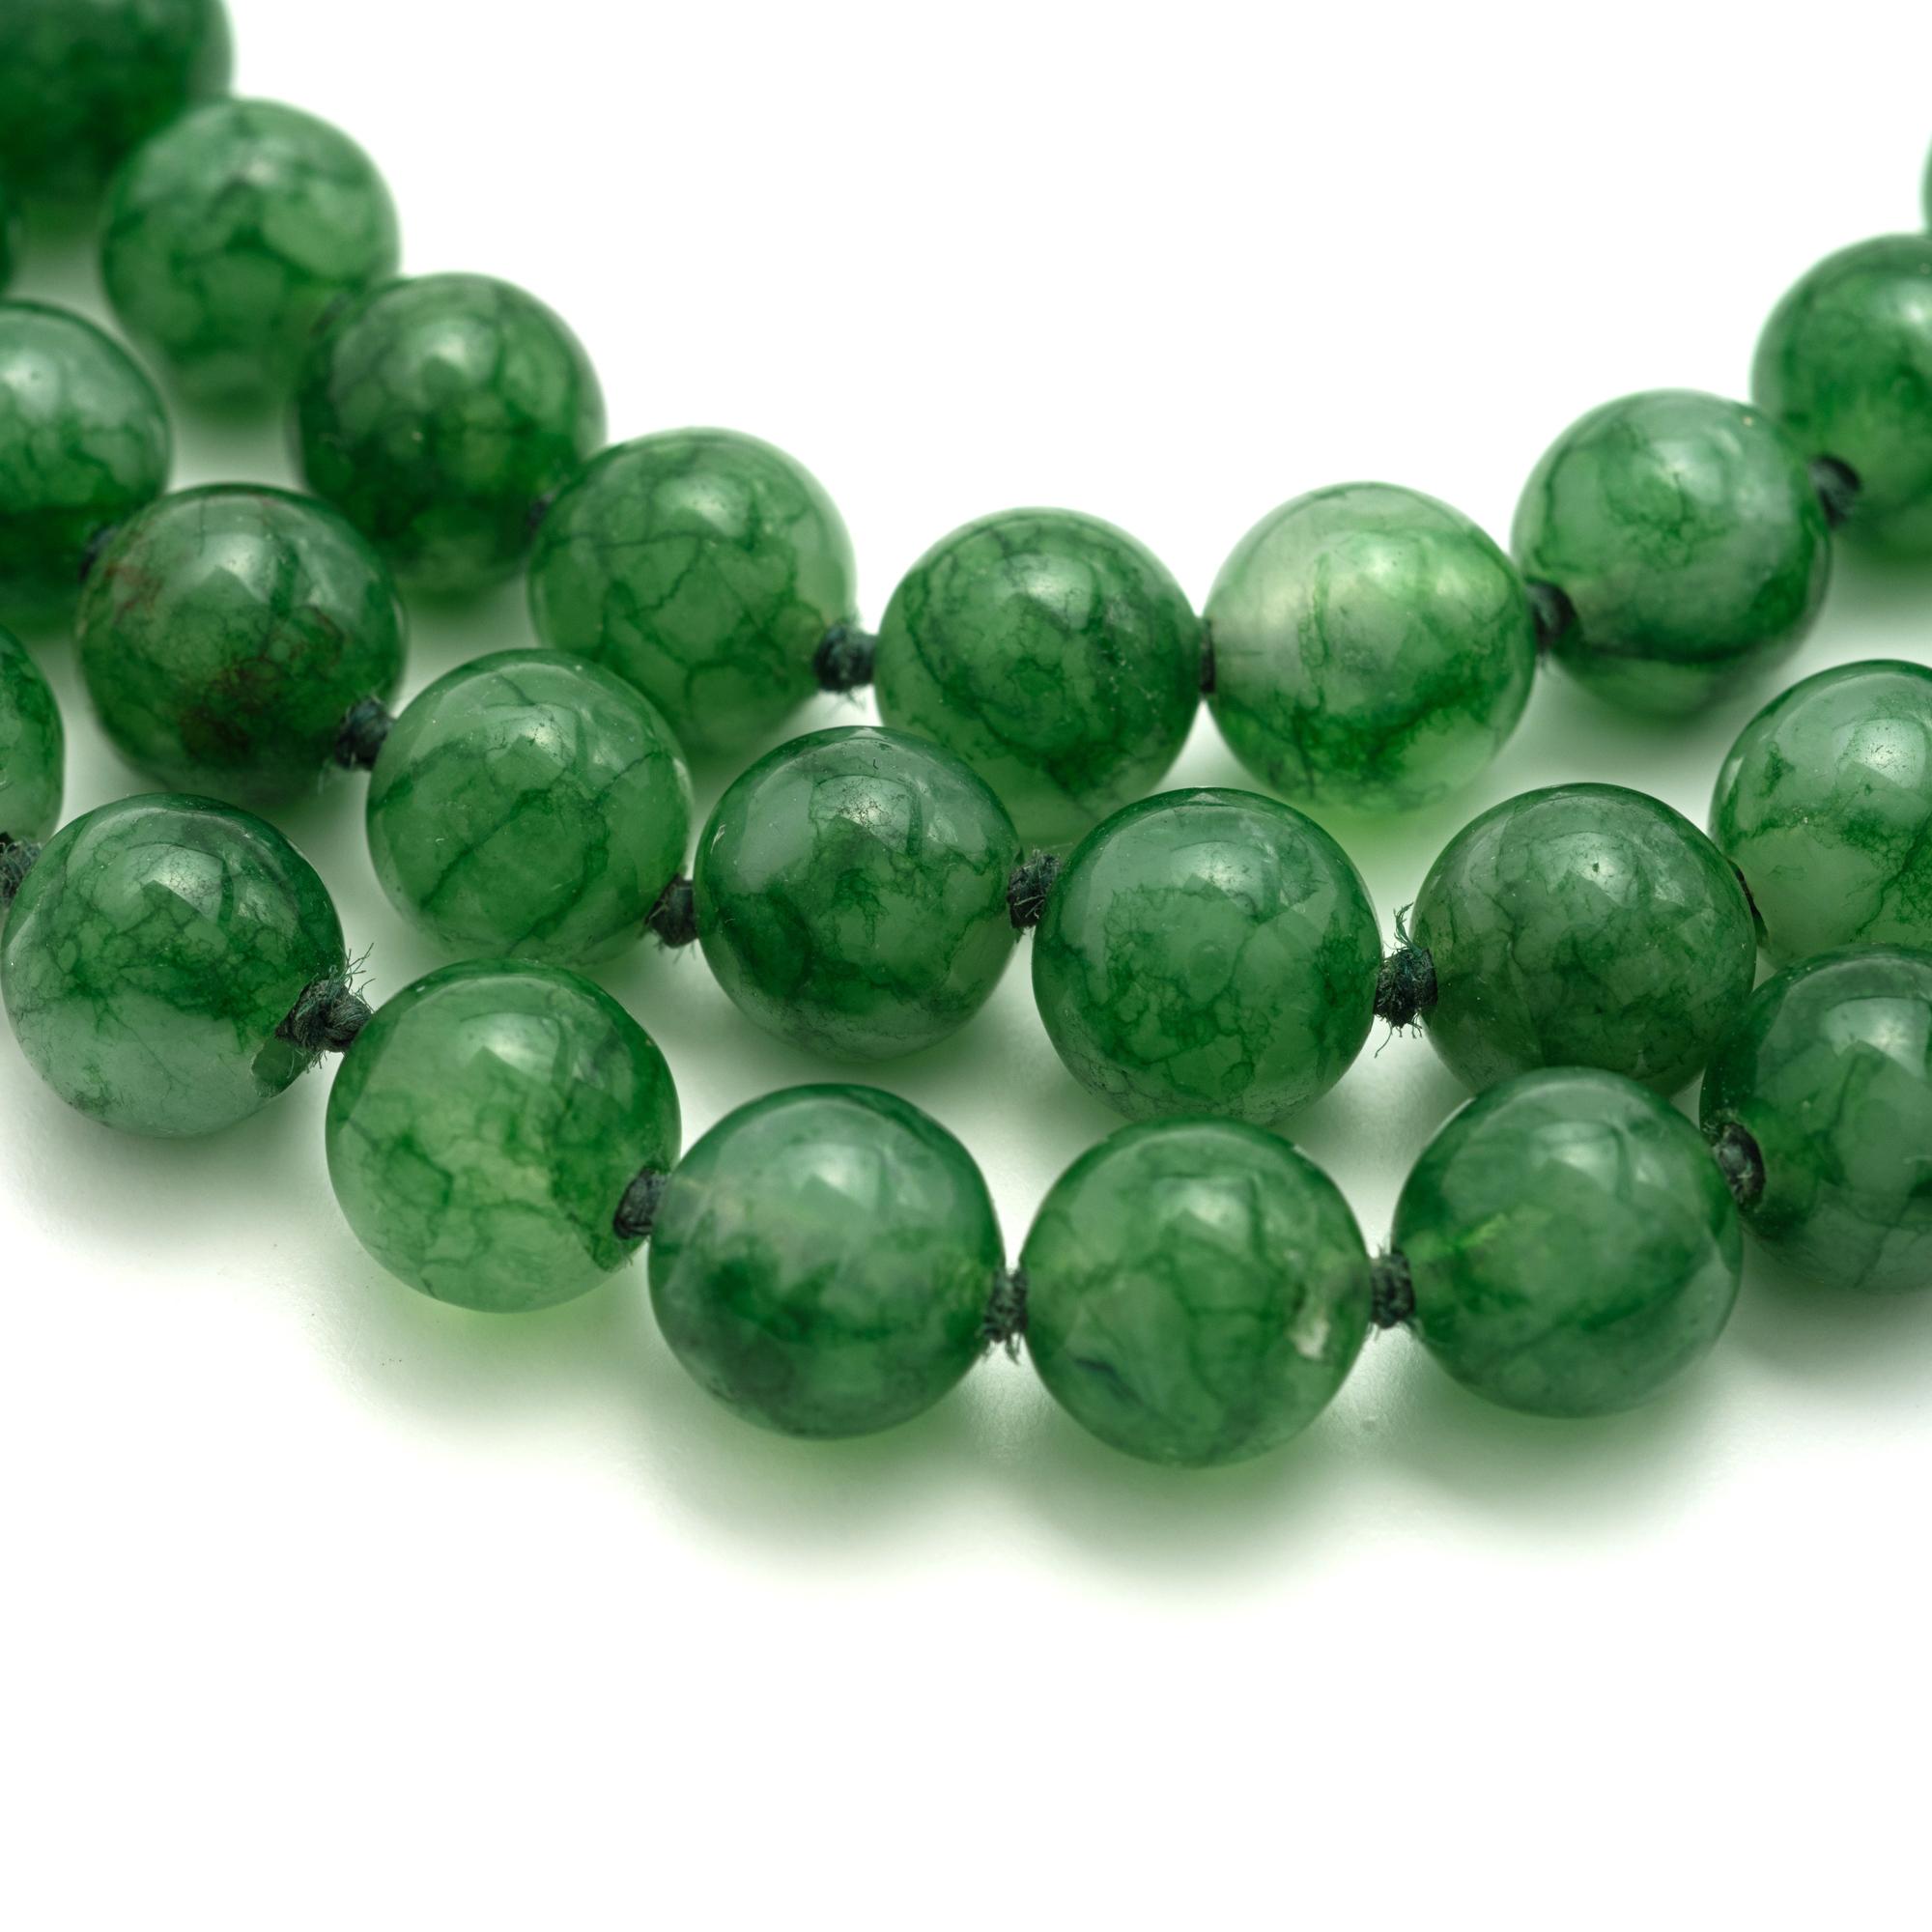 
Jadeite Bead Necklace, composed of one hundred fifty-three graduated jadeite beads of emerald green color, length approximately 54 inches